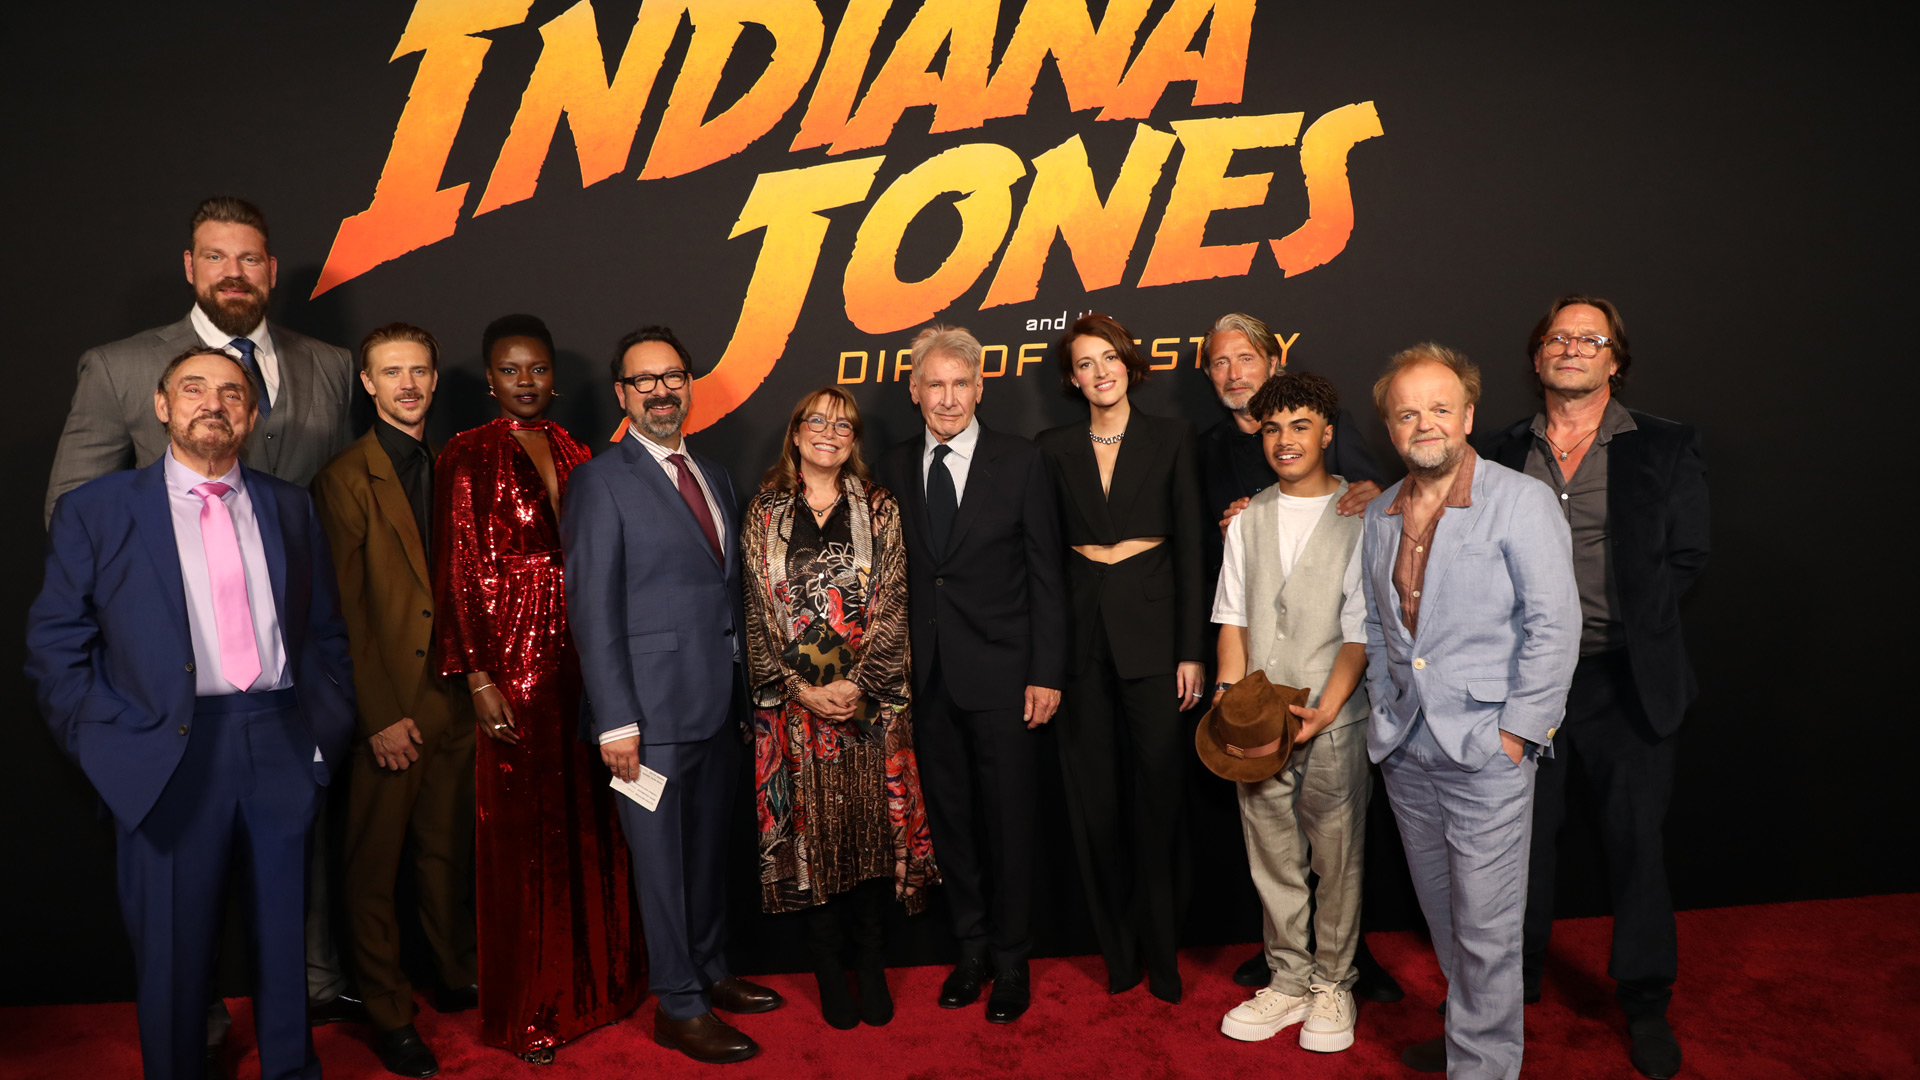 Ethann Isidore and cast from Indiana Jones and the Dial of Destiny